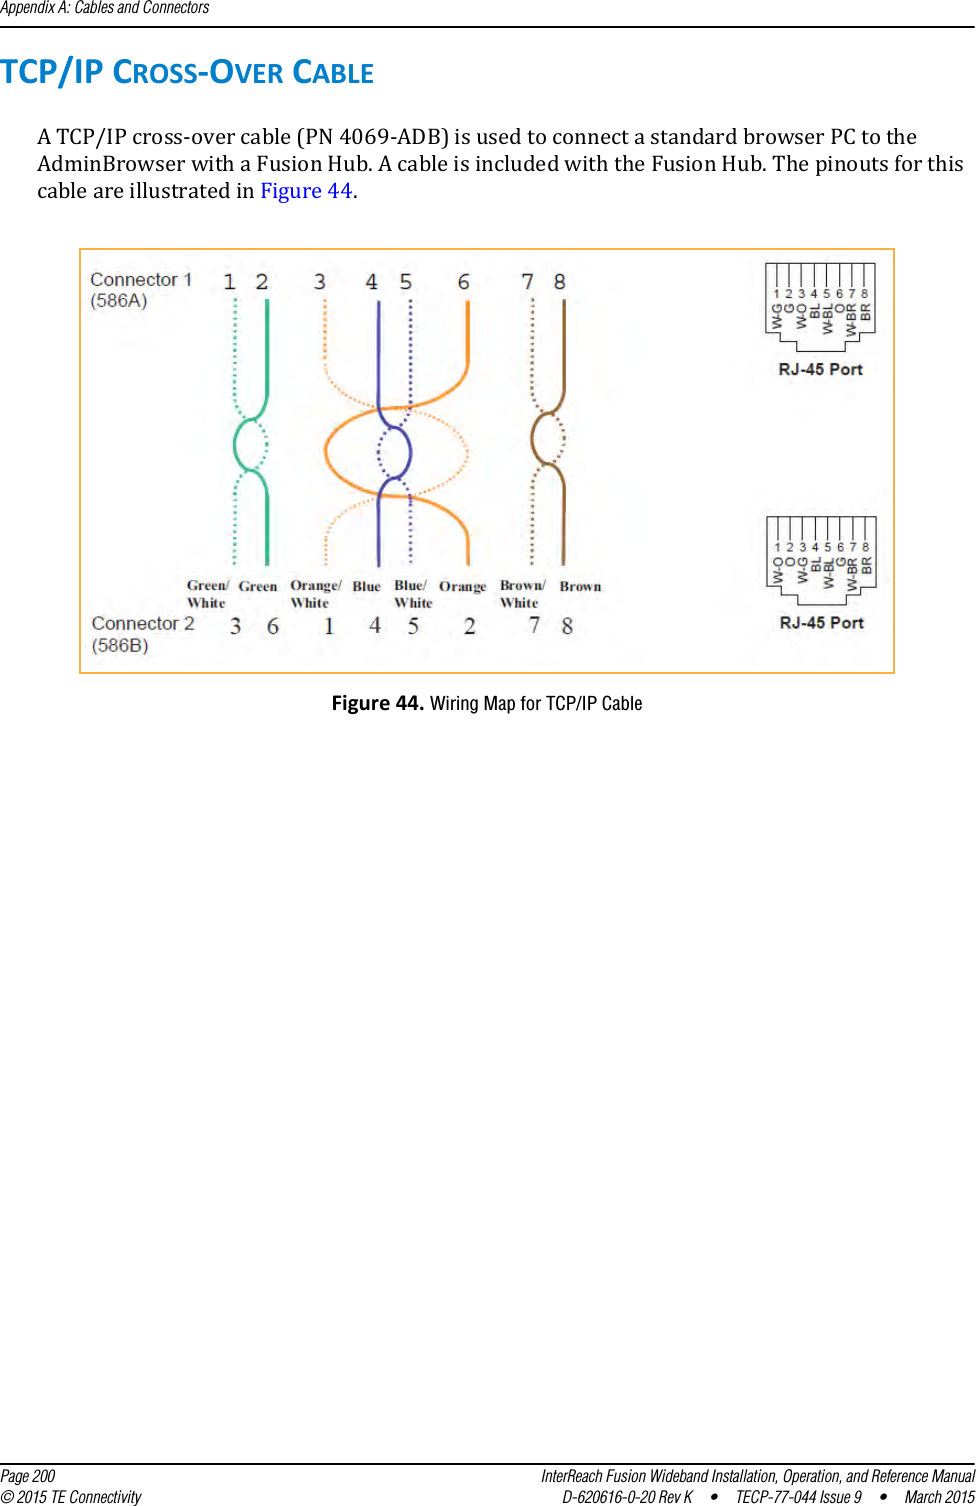 Appendix A: Cables and Connectors  Page 200 InterReach Fusion Wideband Installation, Operation, and Reference Manual© 2015 TE Connectivity D-620616-0-20 Rev K  •  TECP-77-044 Issue 9  •  March 2015TCP/IP CROSS-OVER CABLEA TCP/IP cross-over cable (PN 4069-ADB) is used to connect a standard browser PC to the AdminBrowser with a Fusion Hub. A cable is included with the Fusion Hub. The pinouts for this cable are illustrated in Figure 44.Figure 44. Wiring Map for TCP/IP Cable